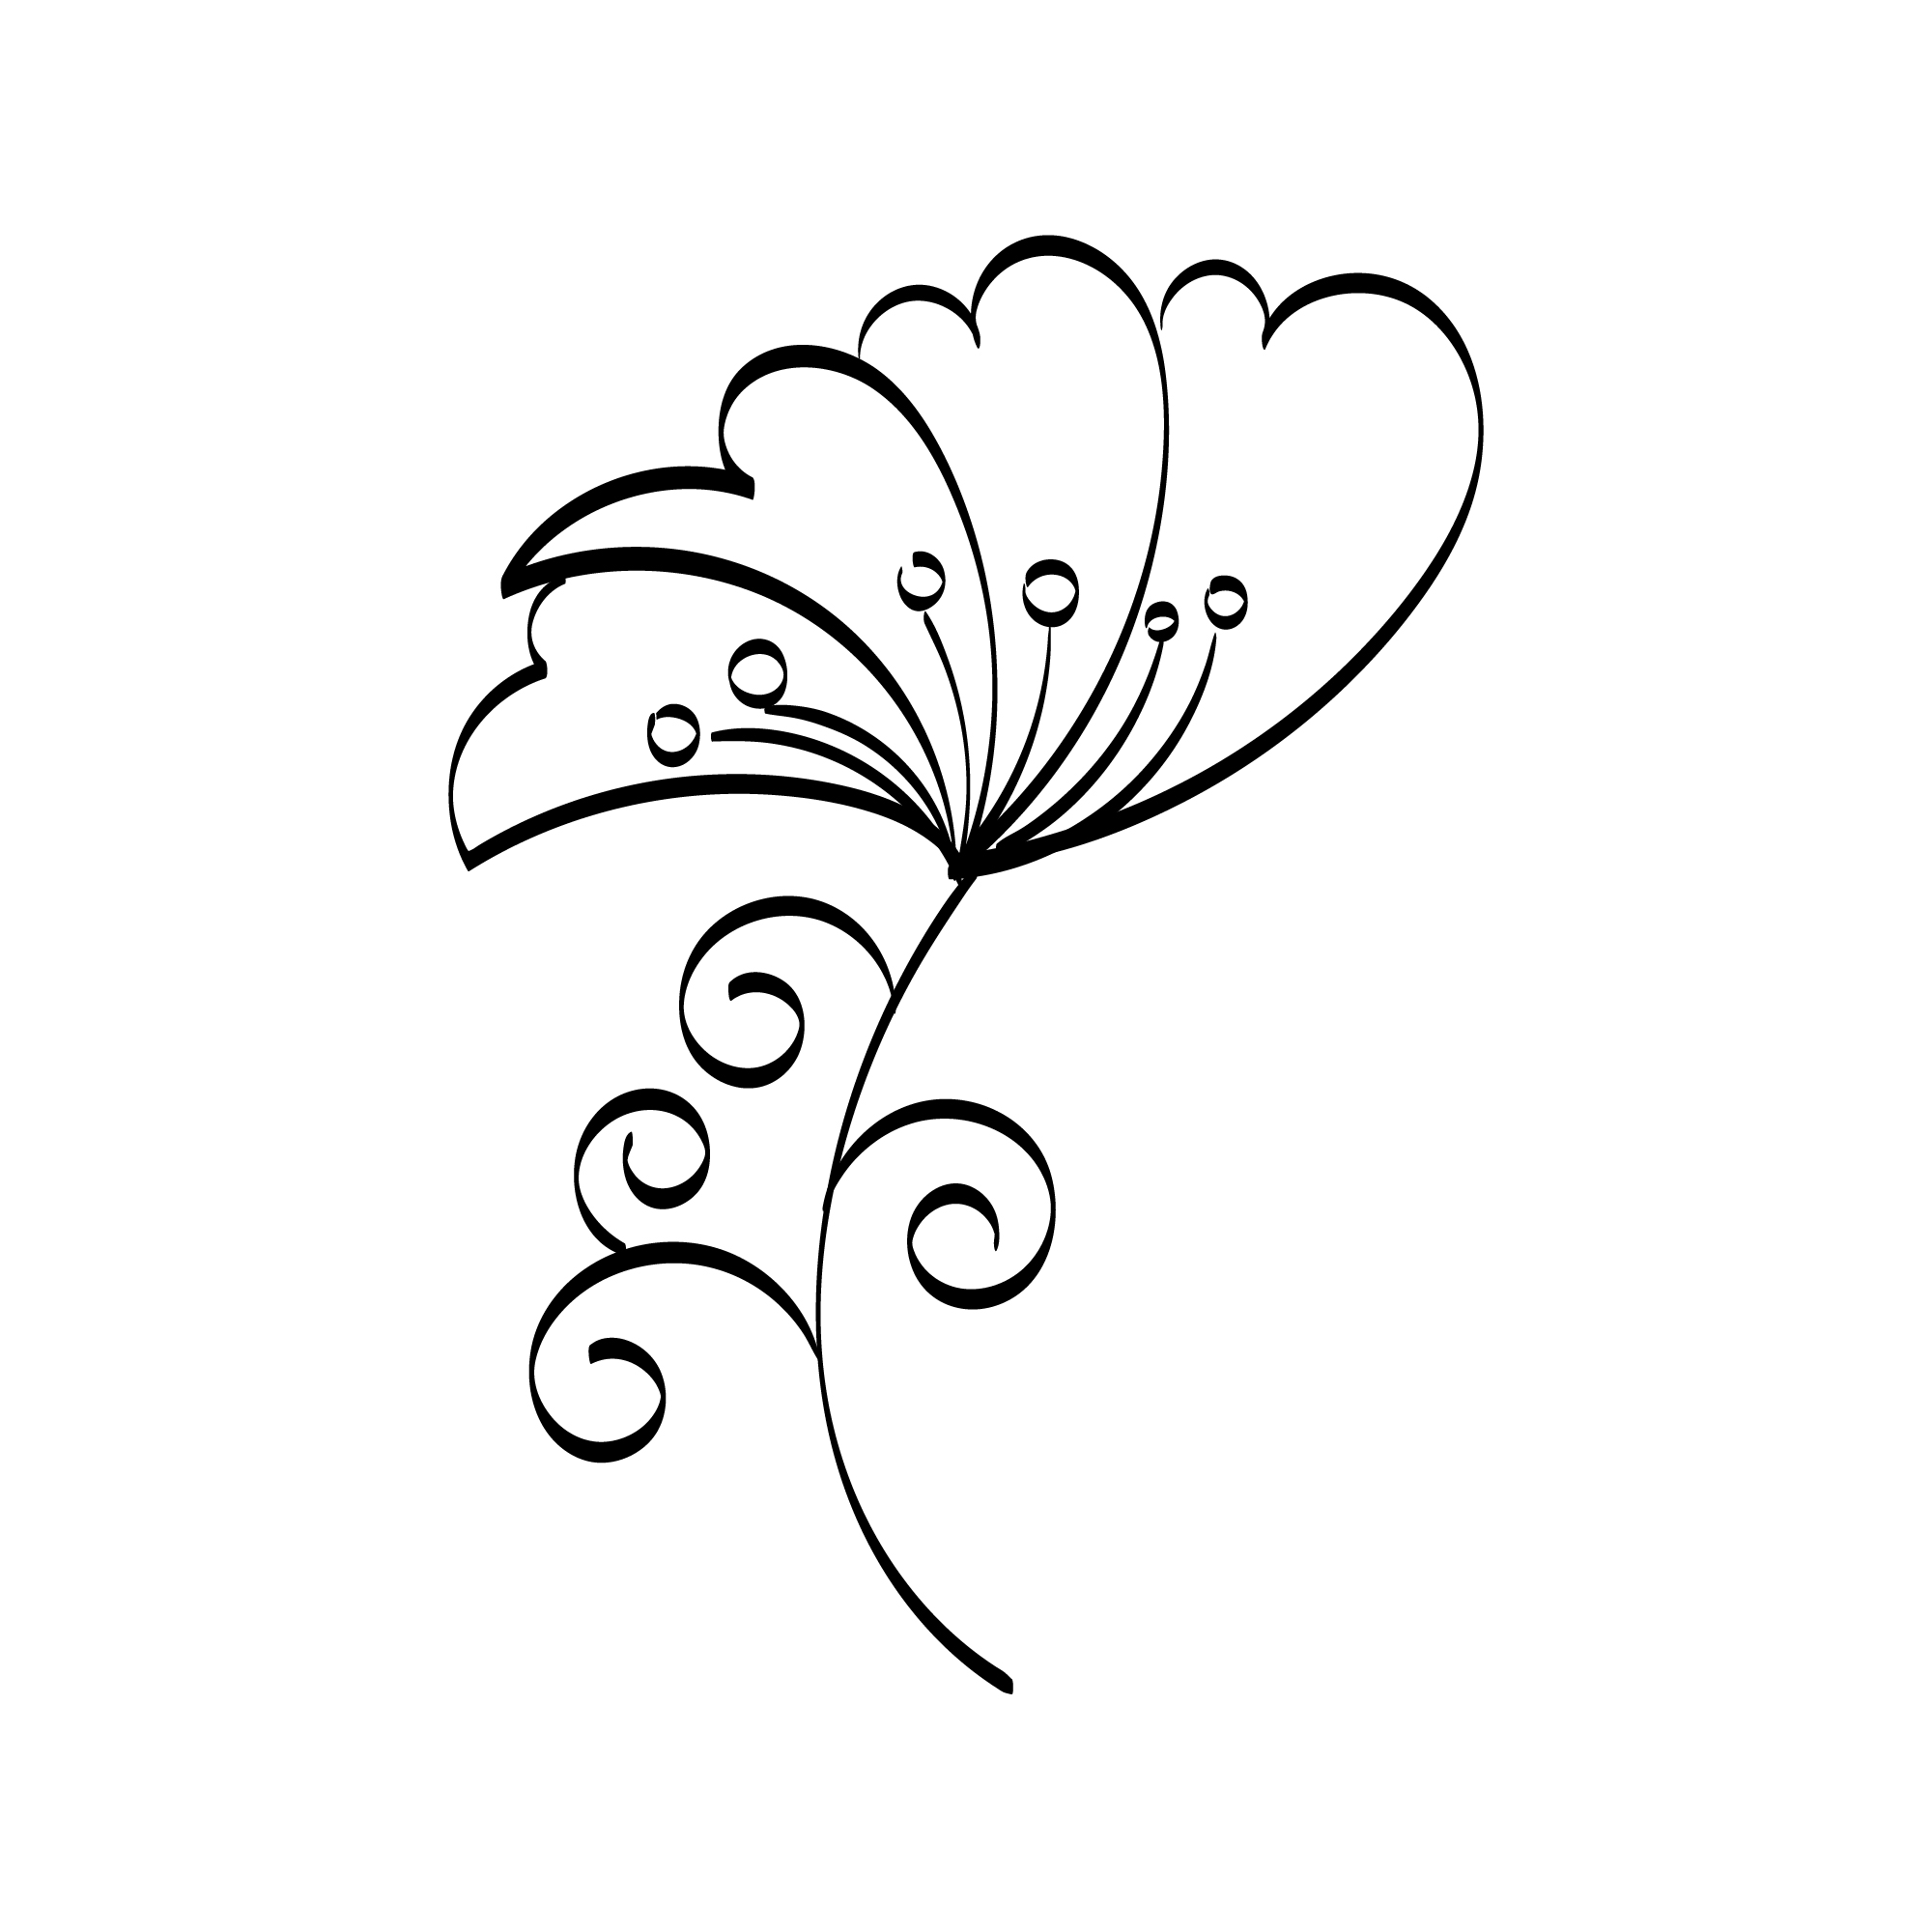 Floral Stylish Art Drawing with Line-art Preview image.